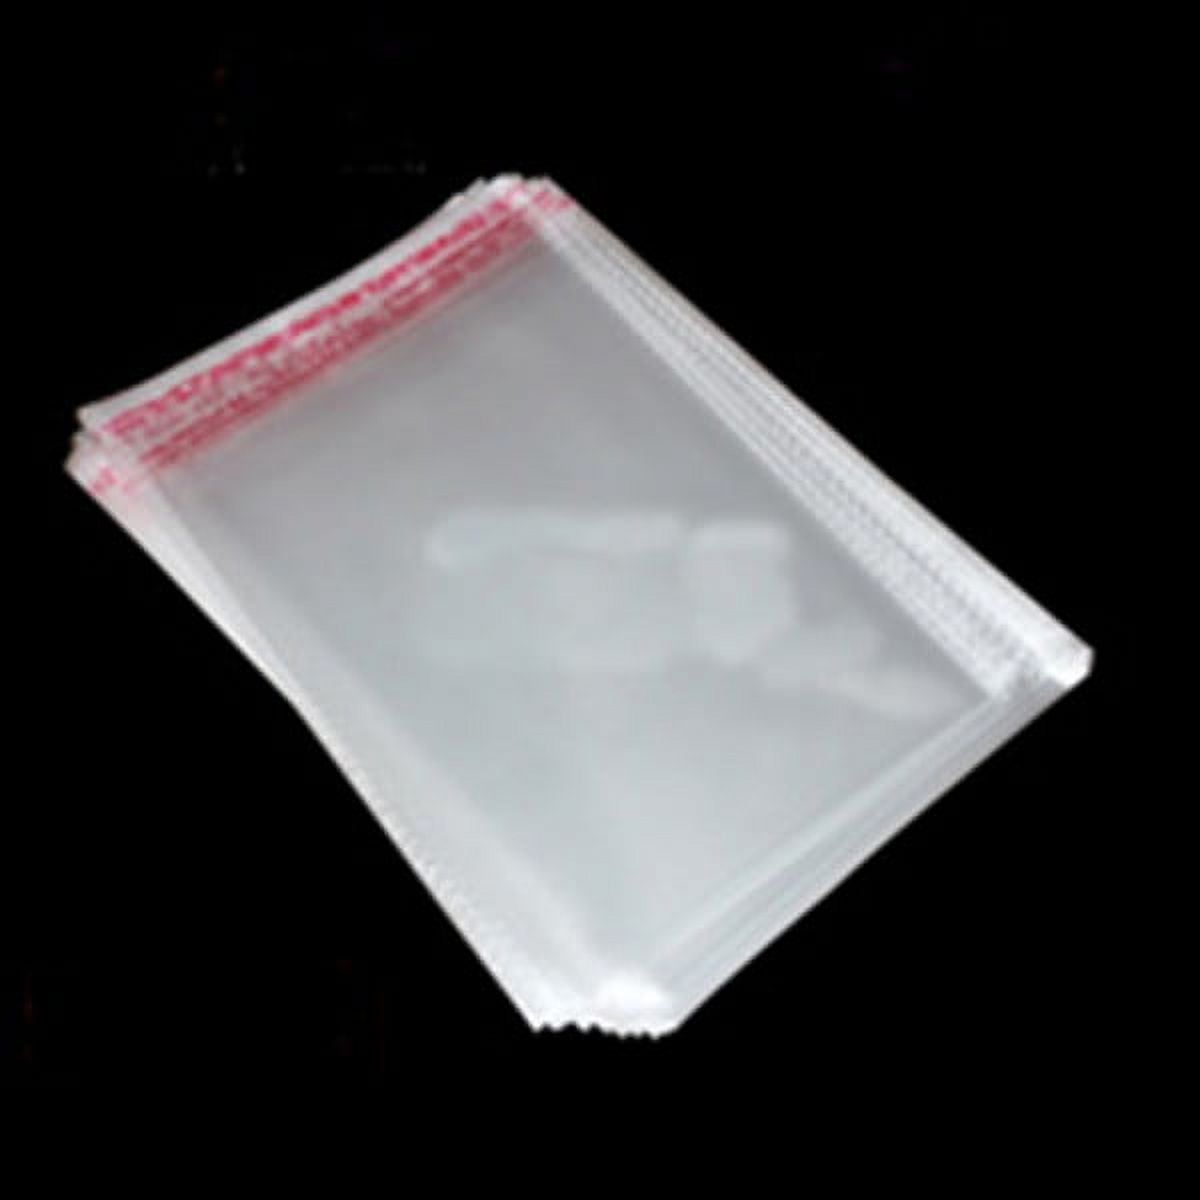 Shop4Mailers 250 19 x 24 Clear Plastic Self Seal Poly Bags 1.5 Mil